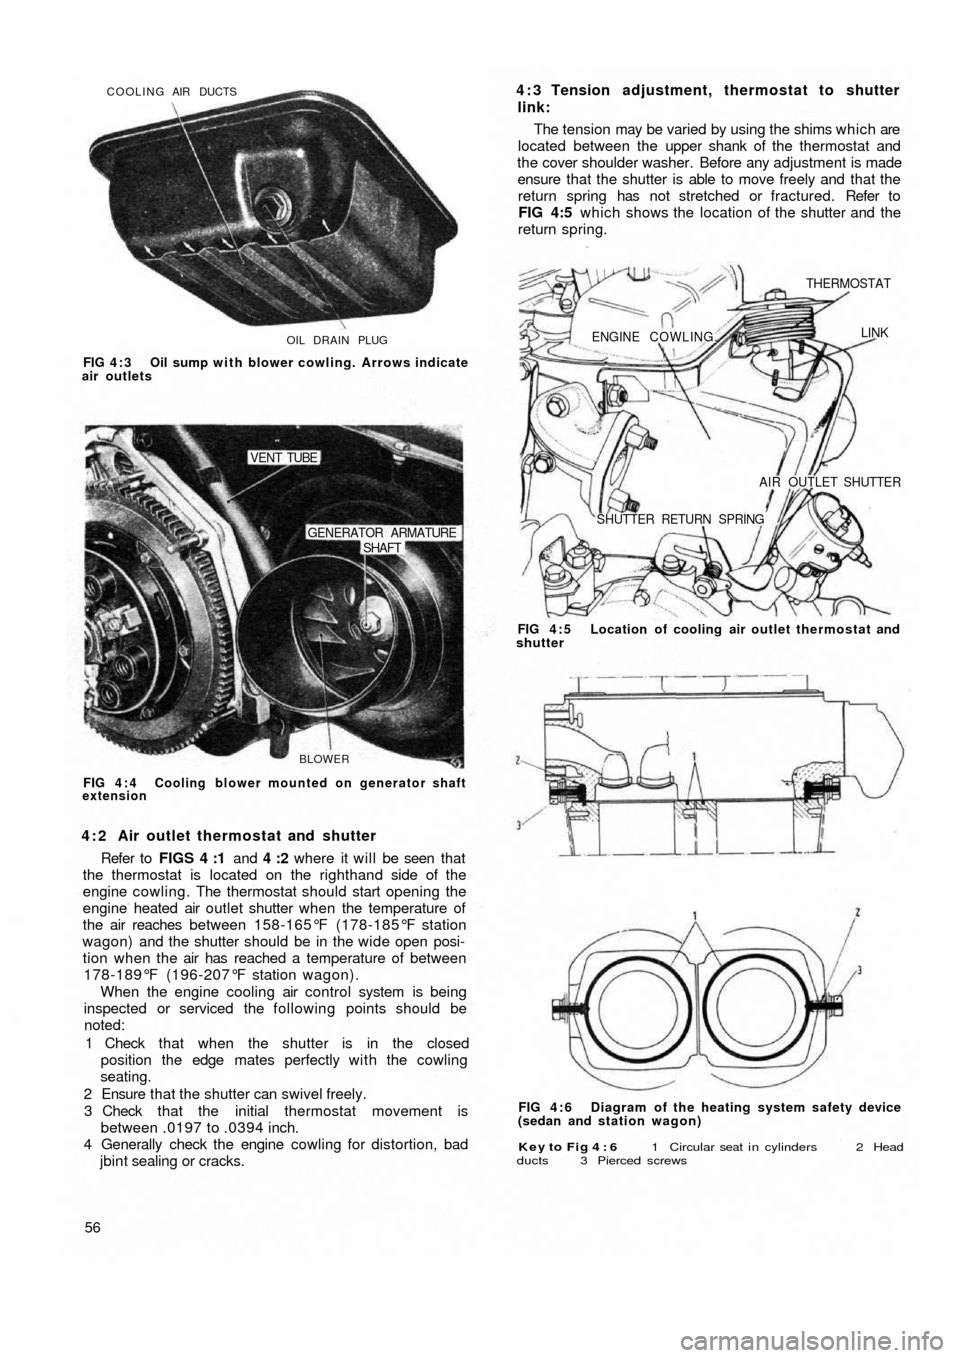 FIAT 500 1957 1.G Workshop Manual OIL DRAIN PLUG COOLING AIR DUCTS
FIG 4 : 3  Oil sump with blower cowling. Arrows indicate
air outlets
BLOWER
SHAFT GENERATOR ARMATURE
VENT TUBE
FIG 4 : 4  Cooling blower mounted on generator shaft
ext